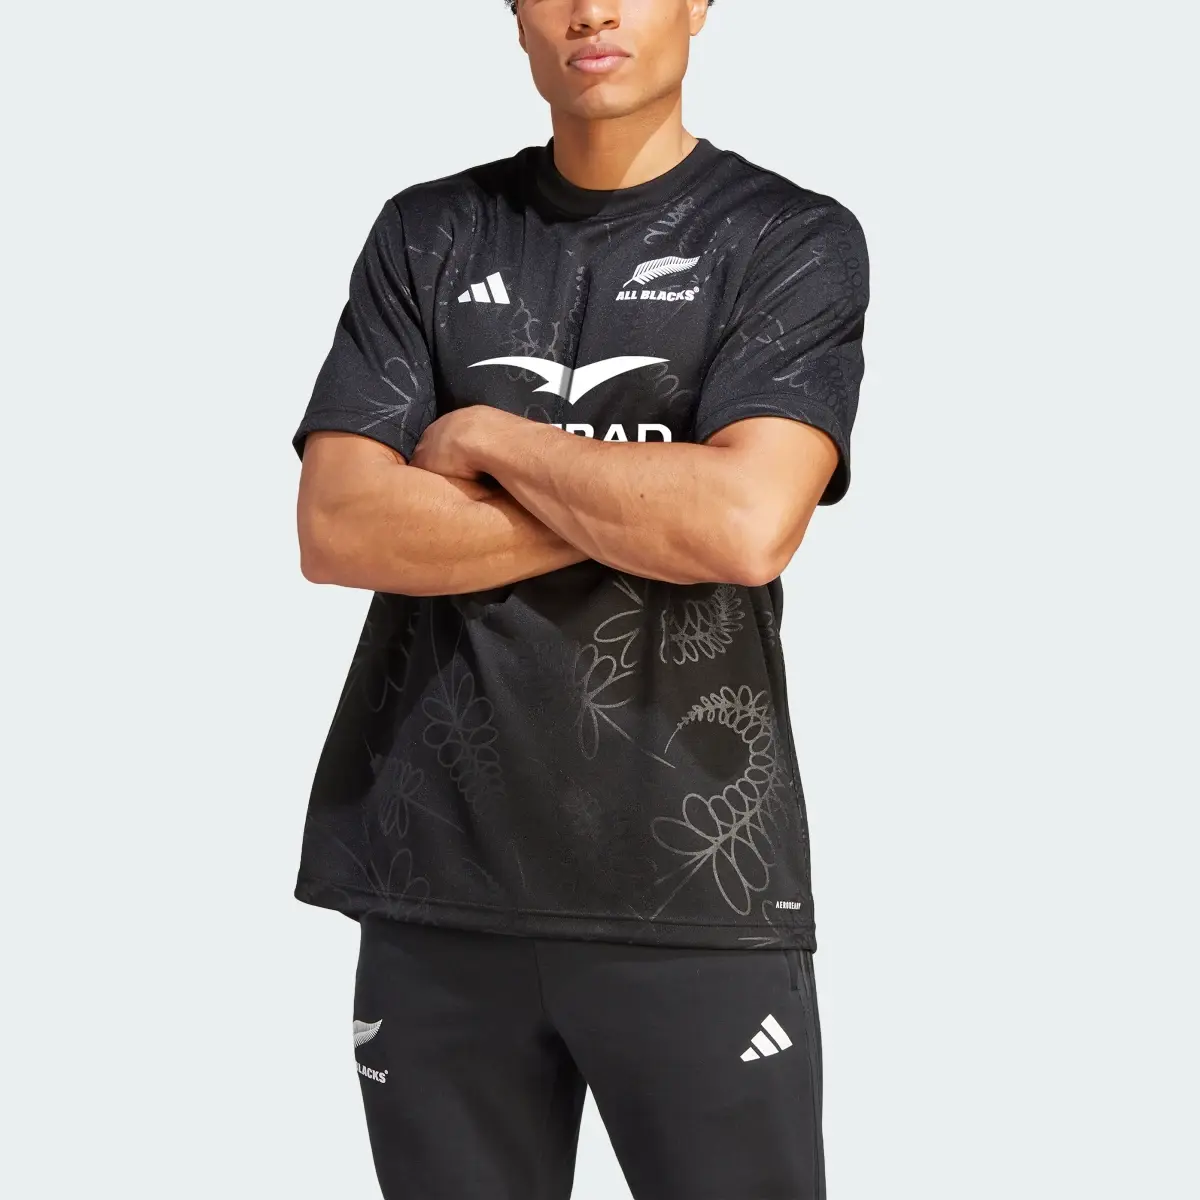 Adidas T-shirt de rugby supporters All Blacks. 1